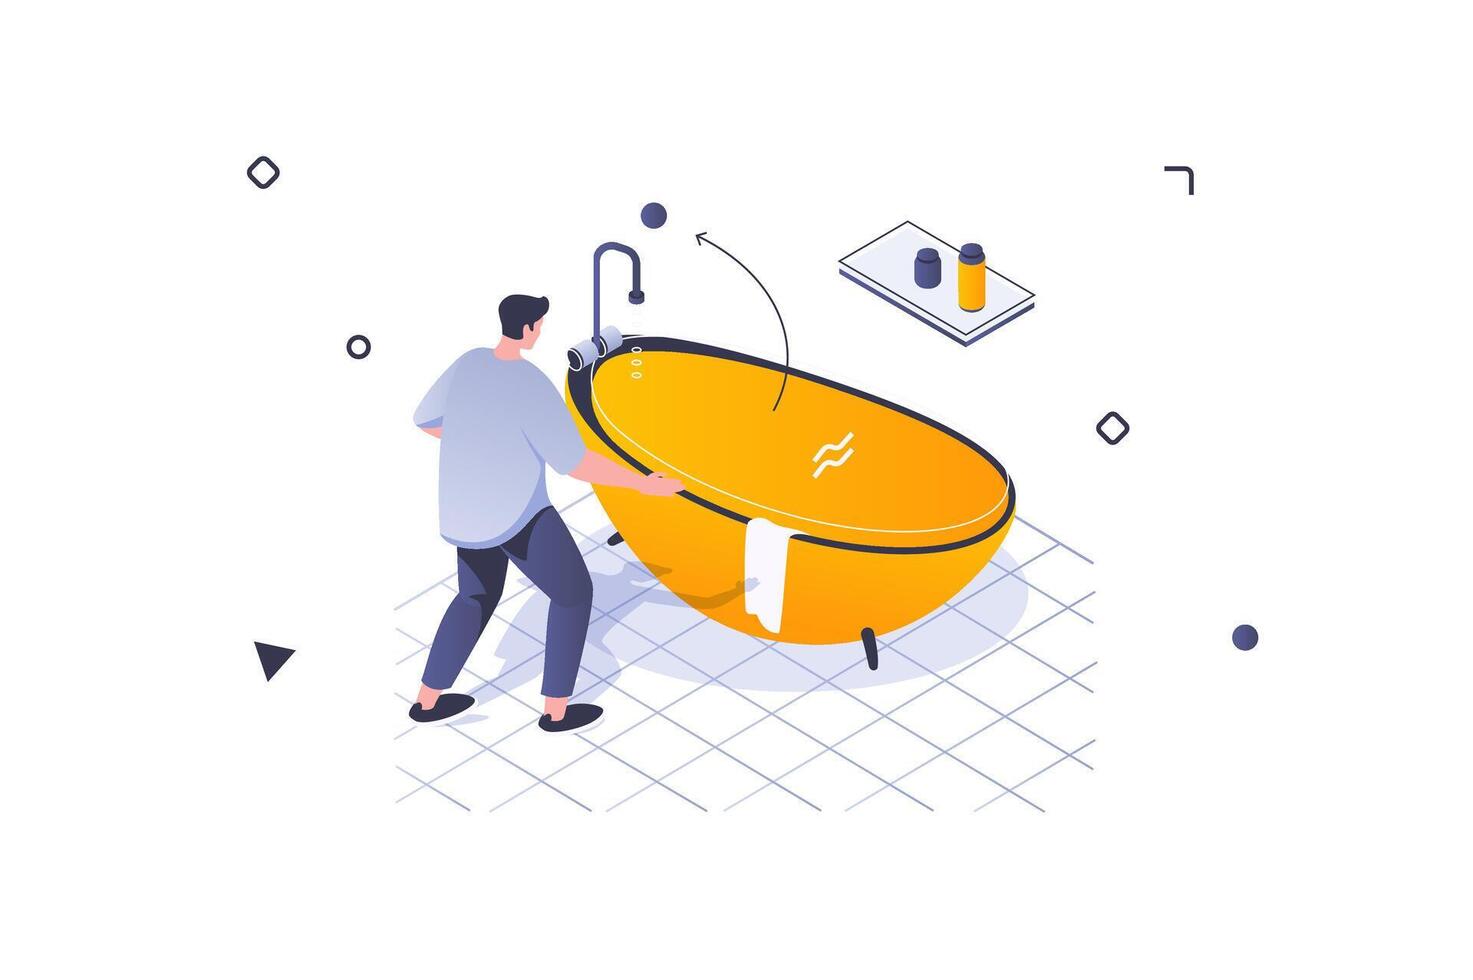 Home interior concept in 3d isometric design. Man stand by bathtub with shelf in bathroom. Furnishing and decoration in living room. Vector illustration with isometric people scene for web graphic